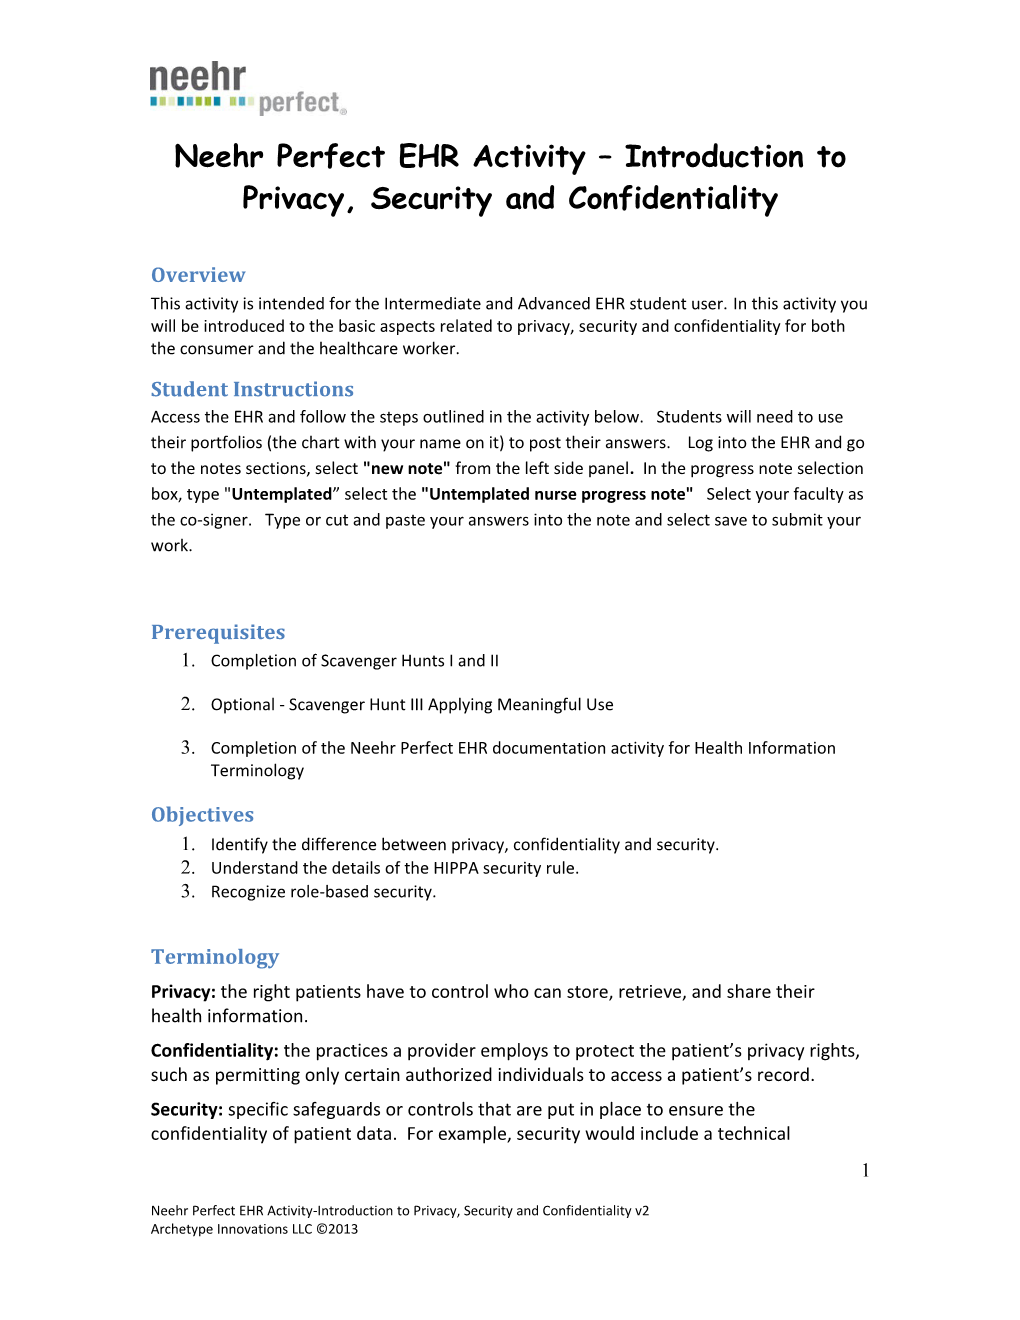 Neehr Perfect EHR Activity Introduction to Privacy, Security and Confidentiality